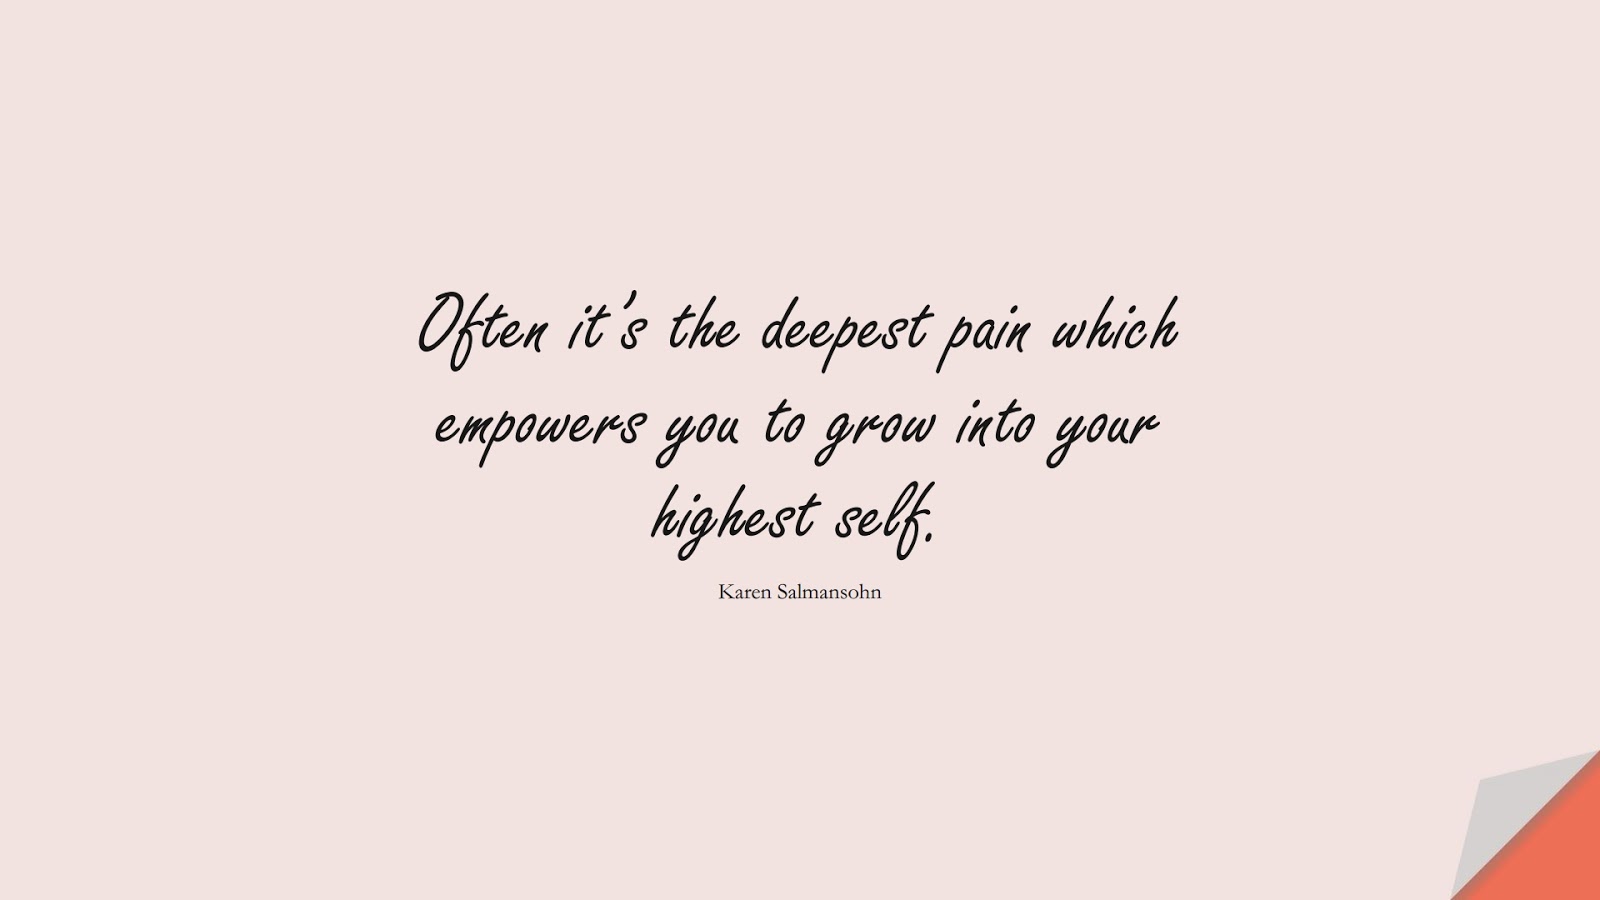 Often it’s the deepest pain which empowers you to grow into your highest self. (Karen Salmansohn);  #HealthQuotes